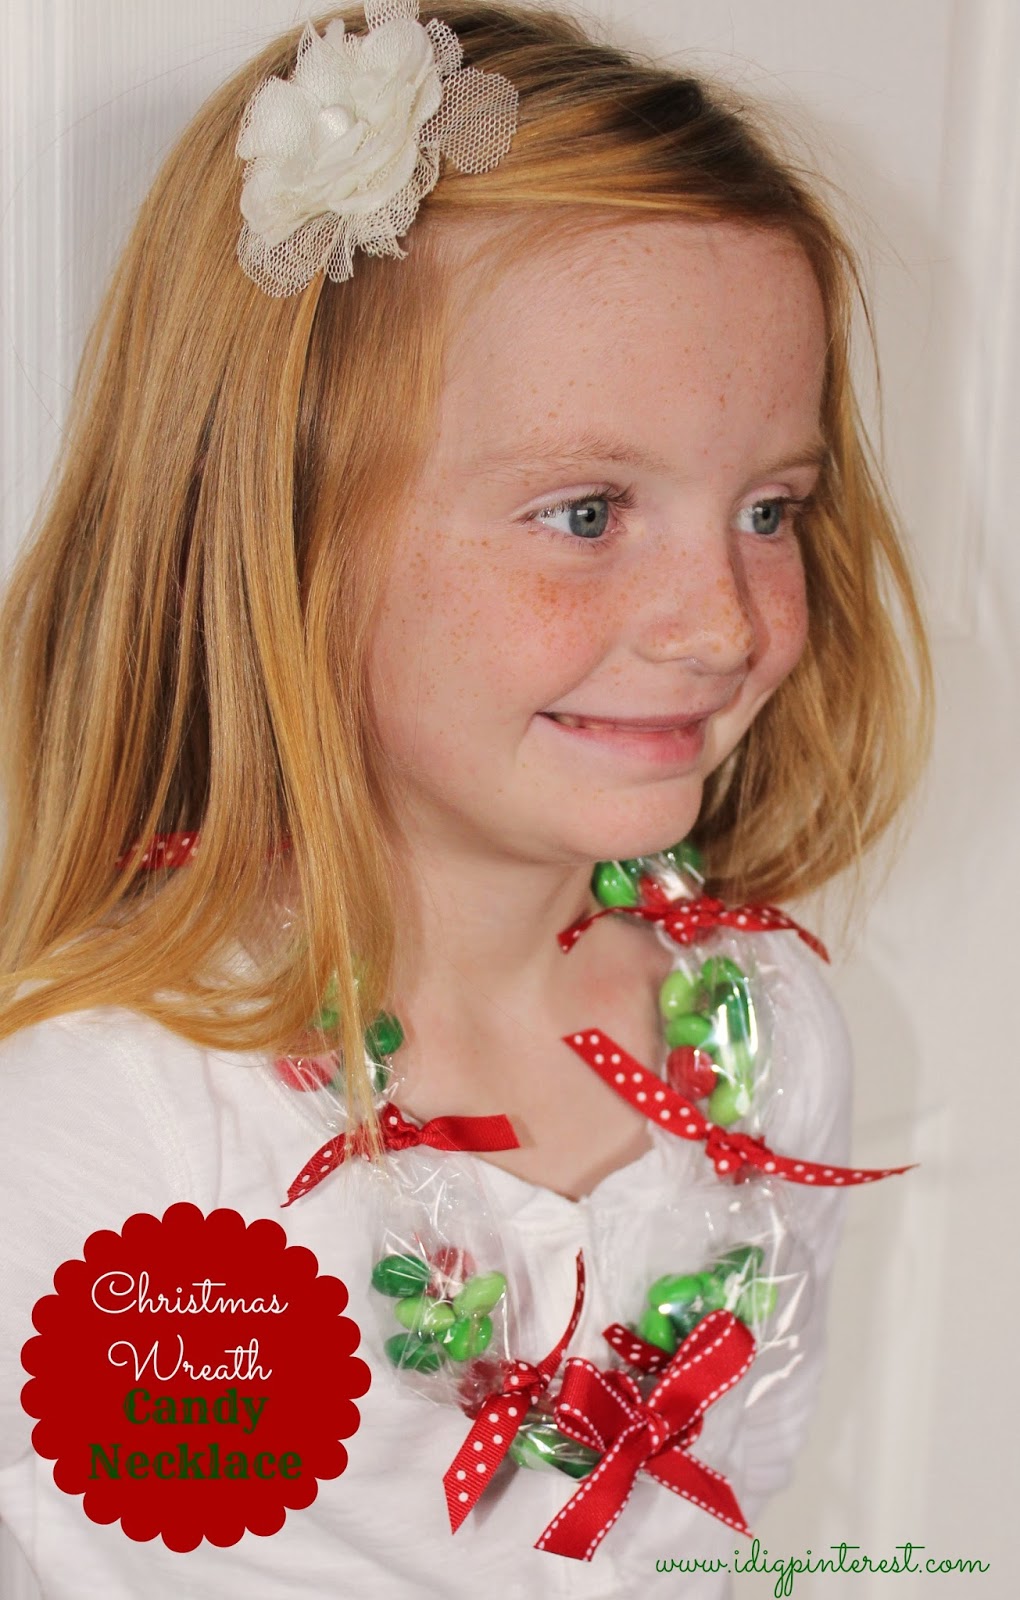 Christmas Wreath Candy Necklace Kids' Craft I Dig Pinterest